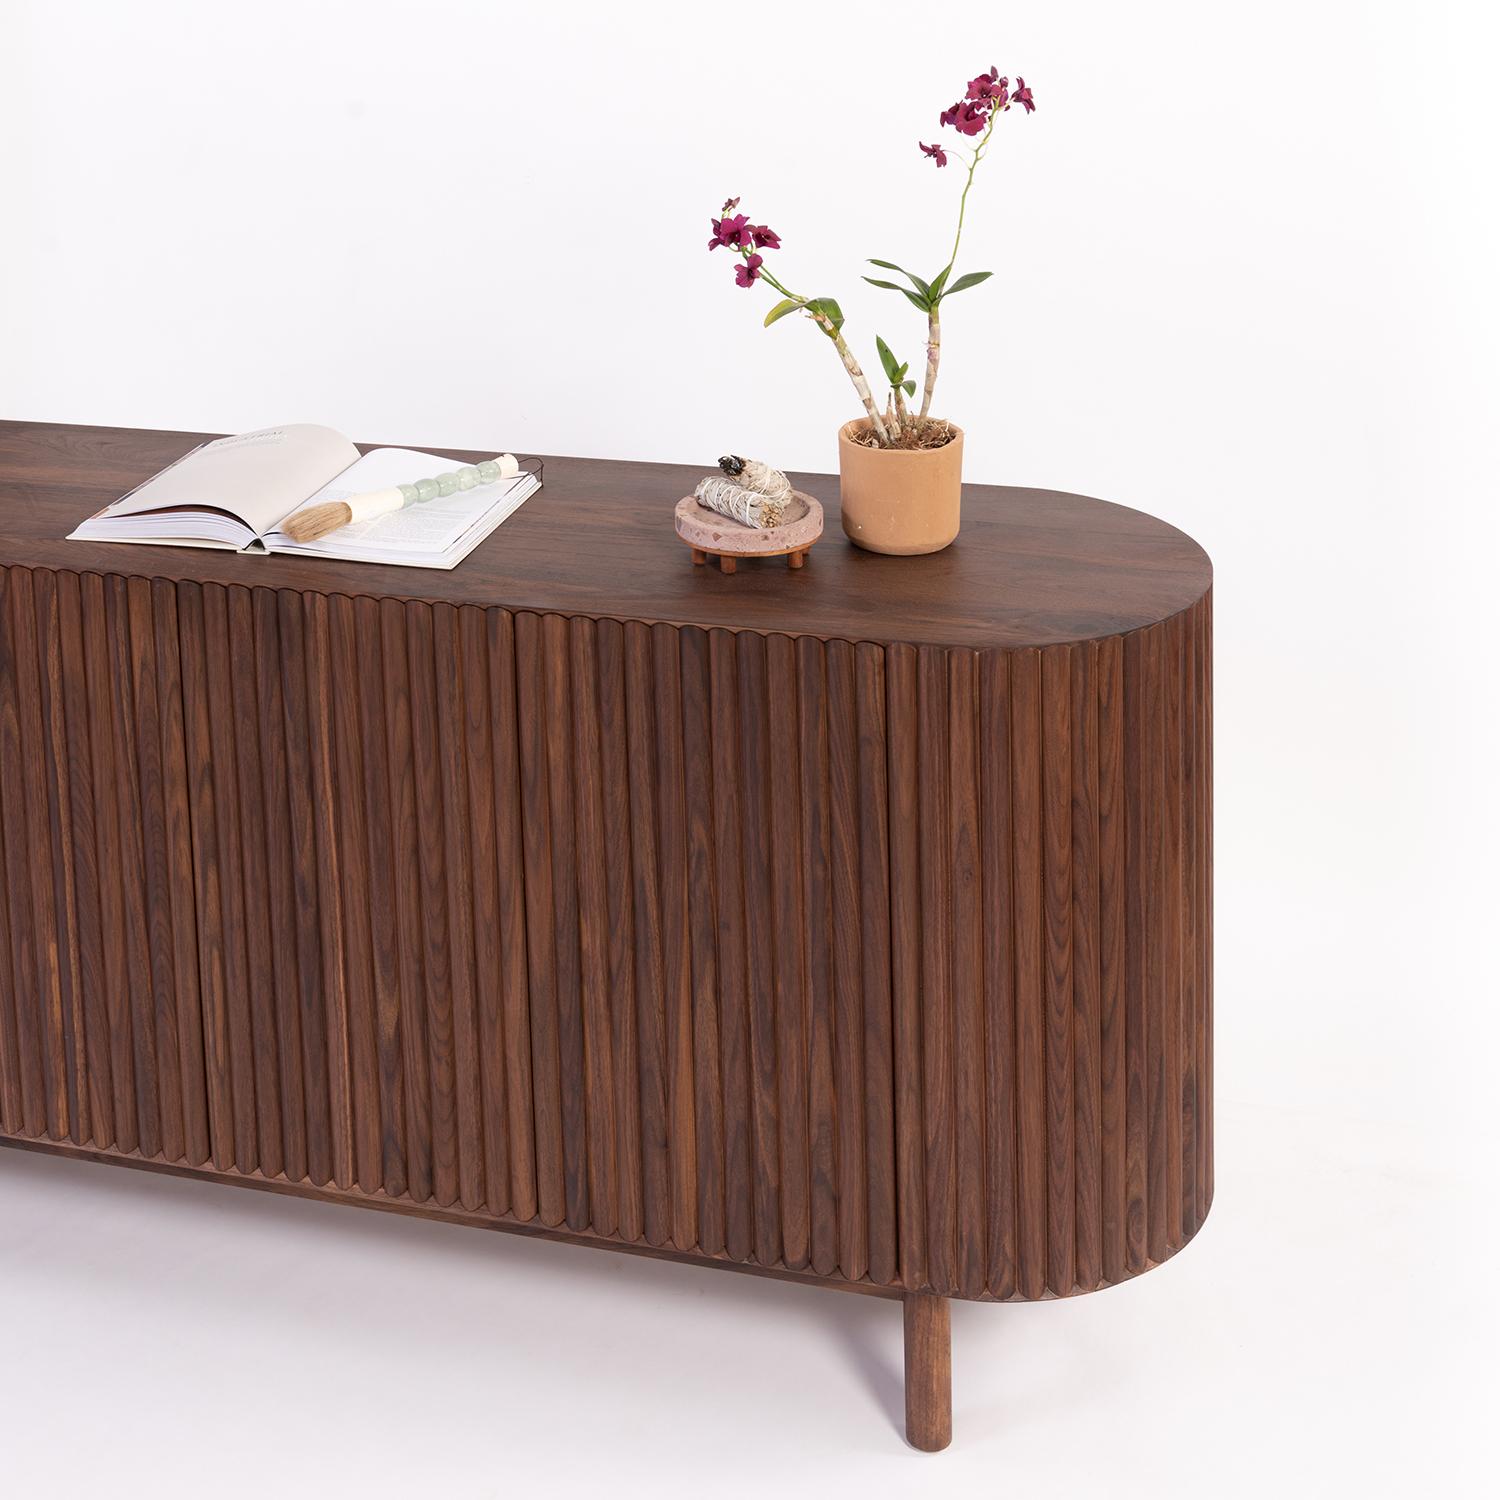 Mexican Slatted 78-Inch Walnut Wood RIMA Credenza by Peca For Sale